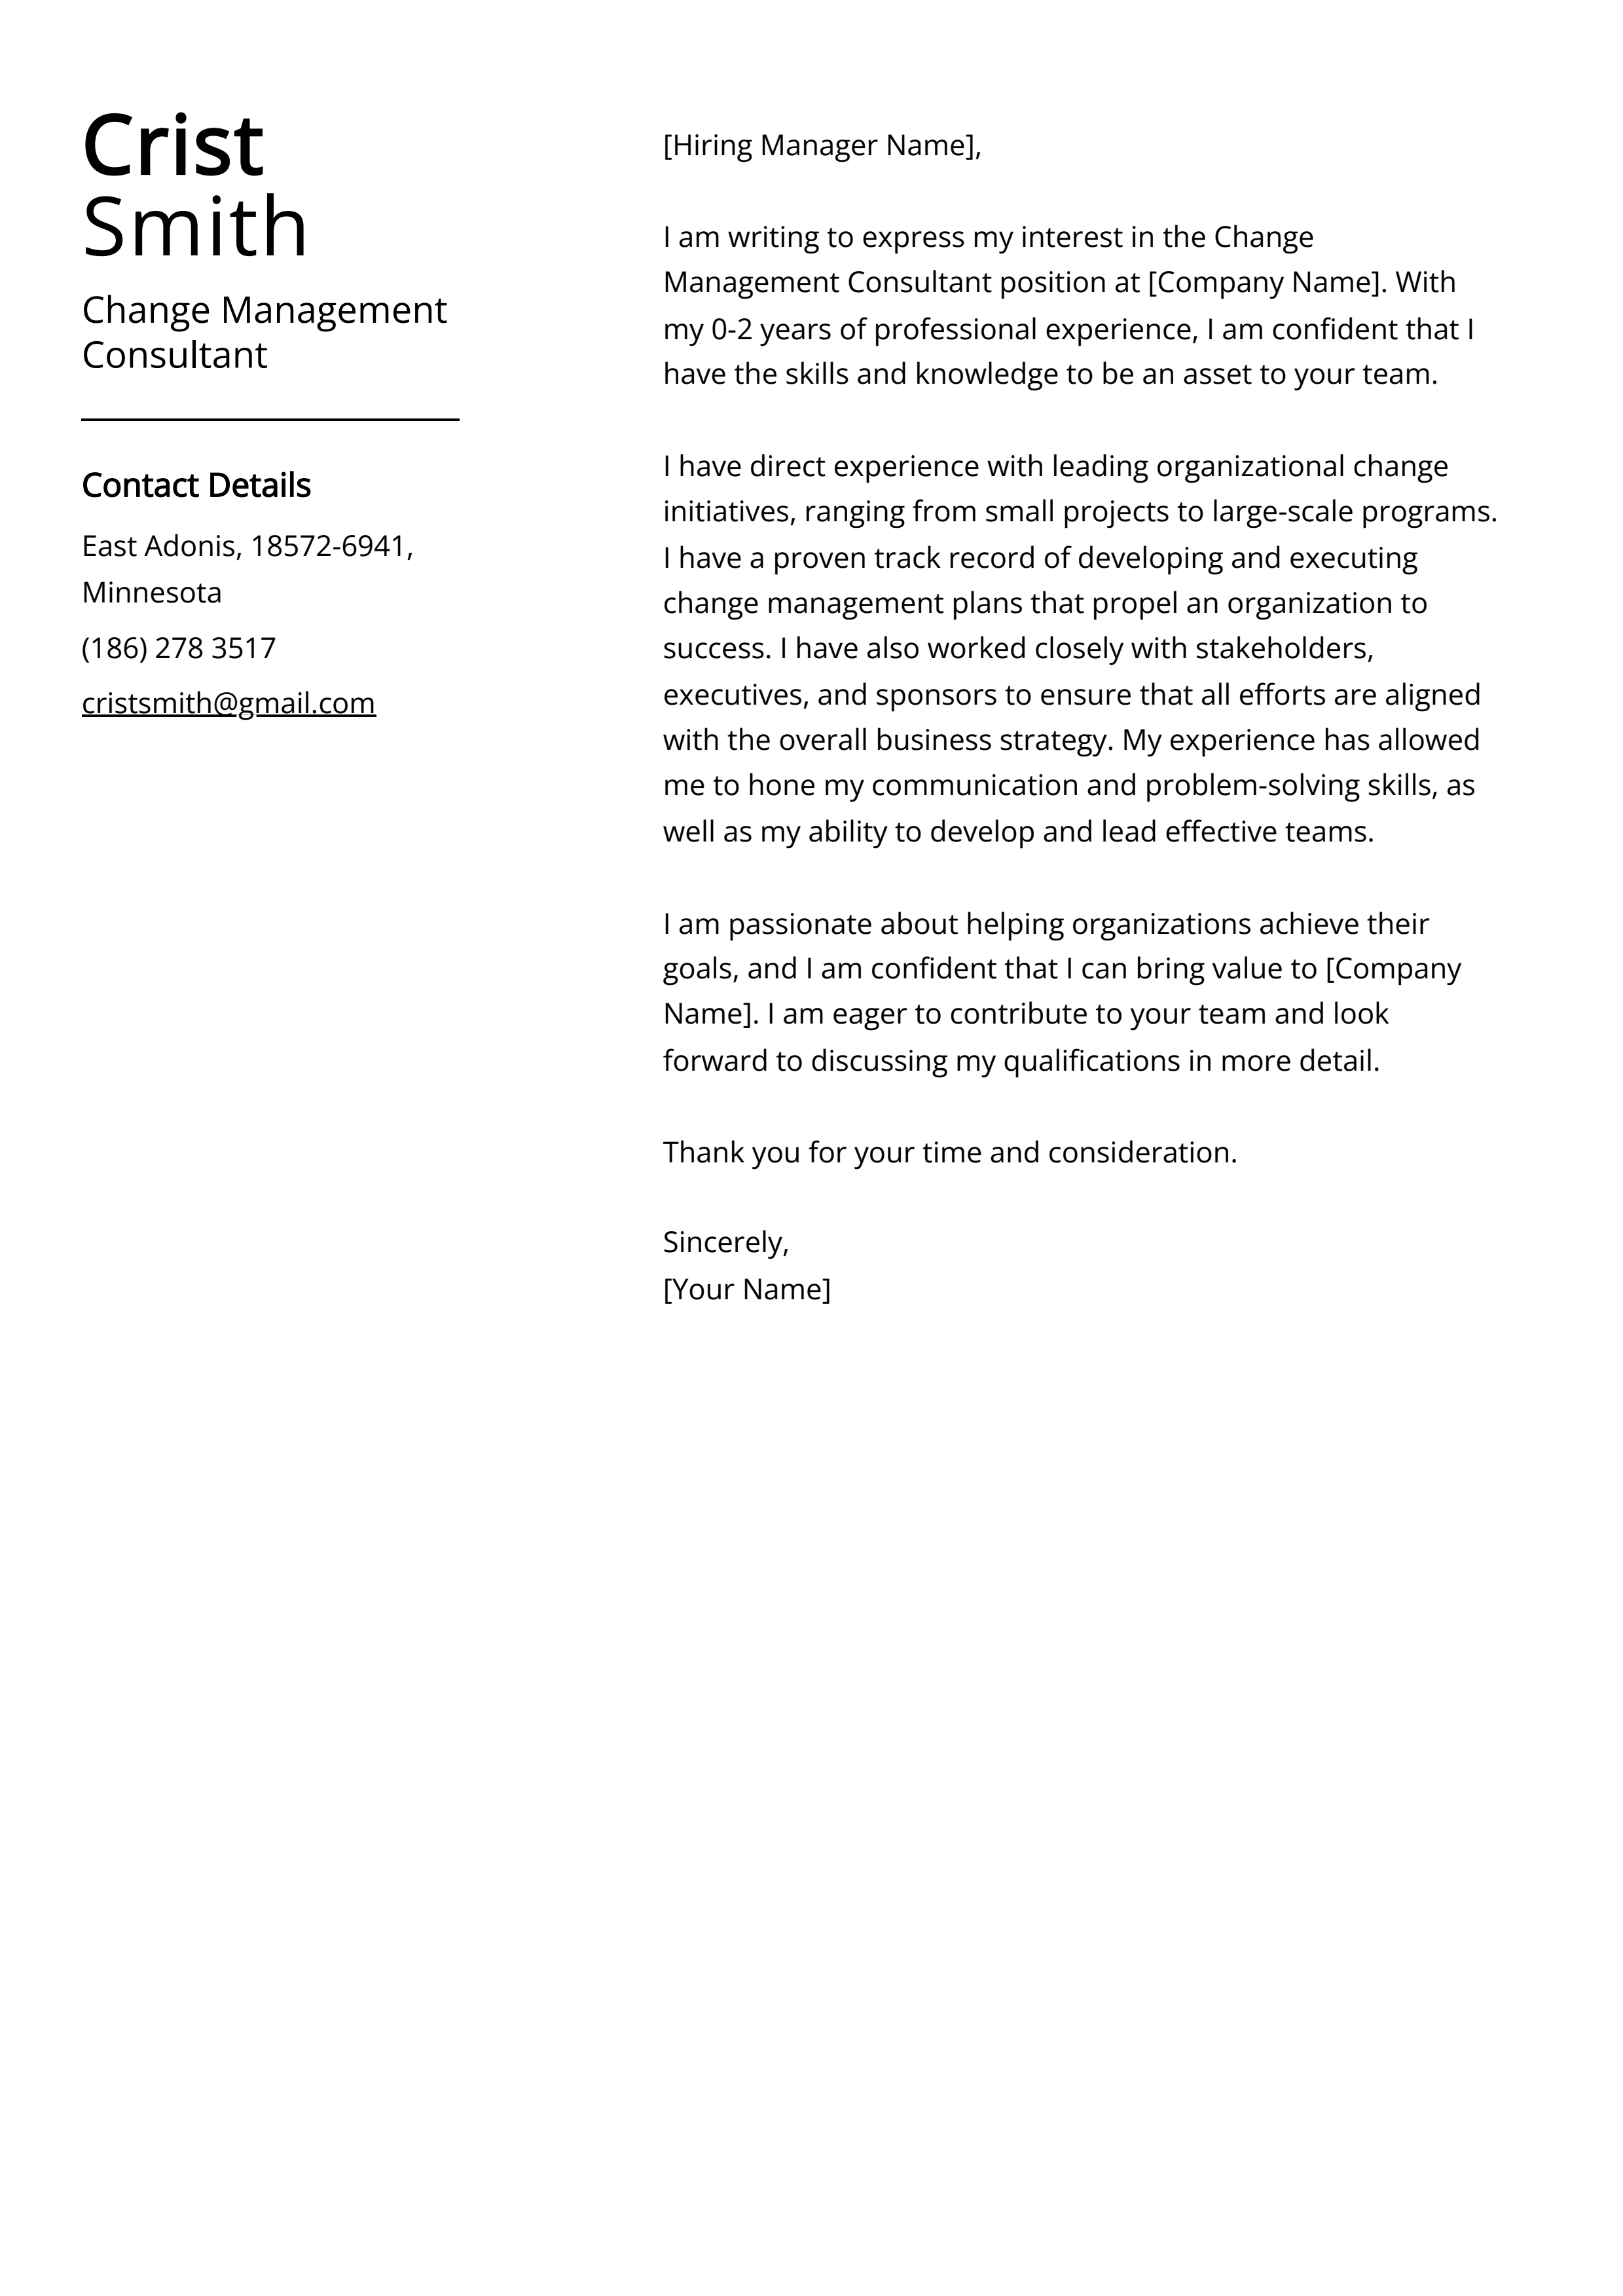 Change Management Consultant Cover Letter Example